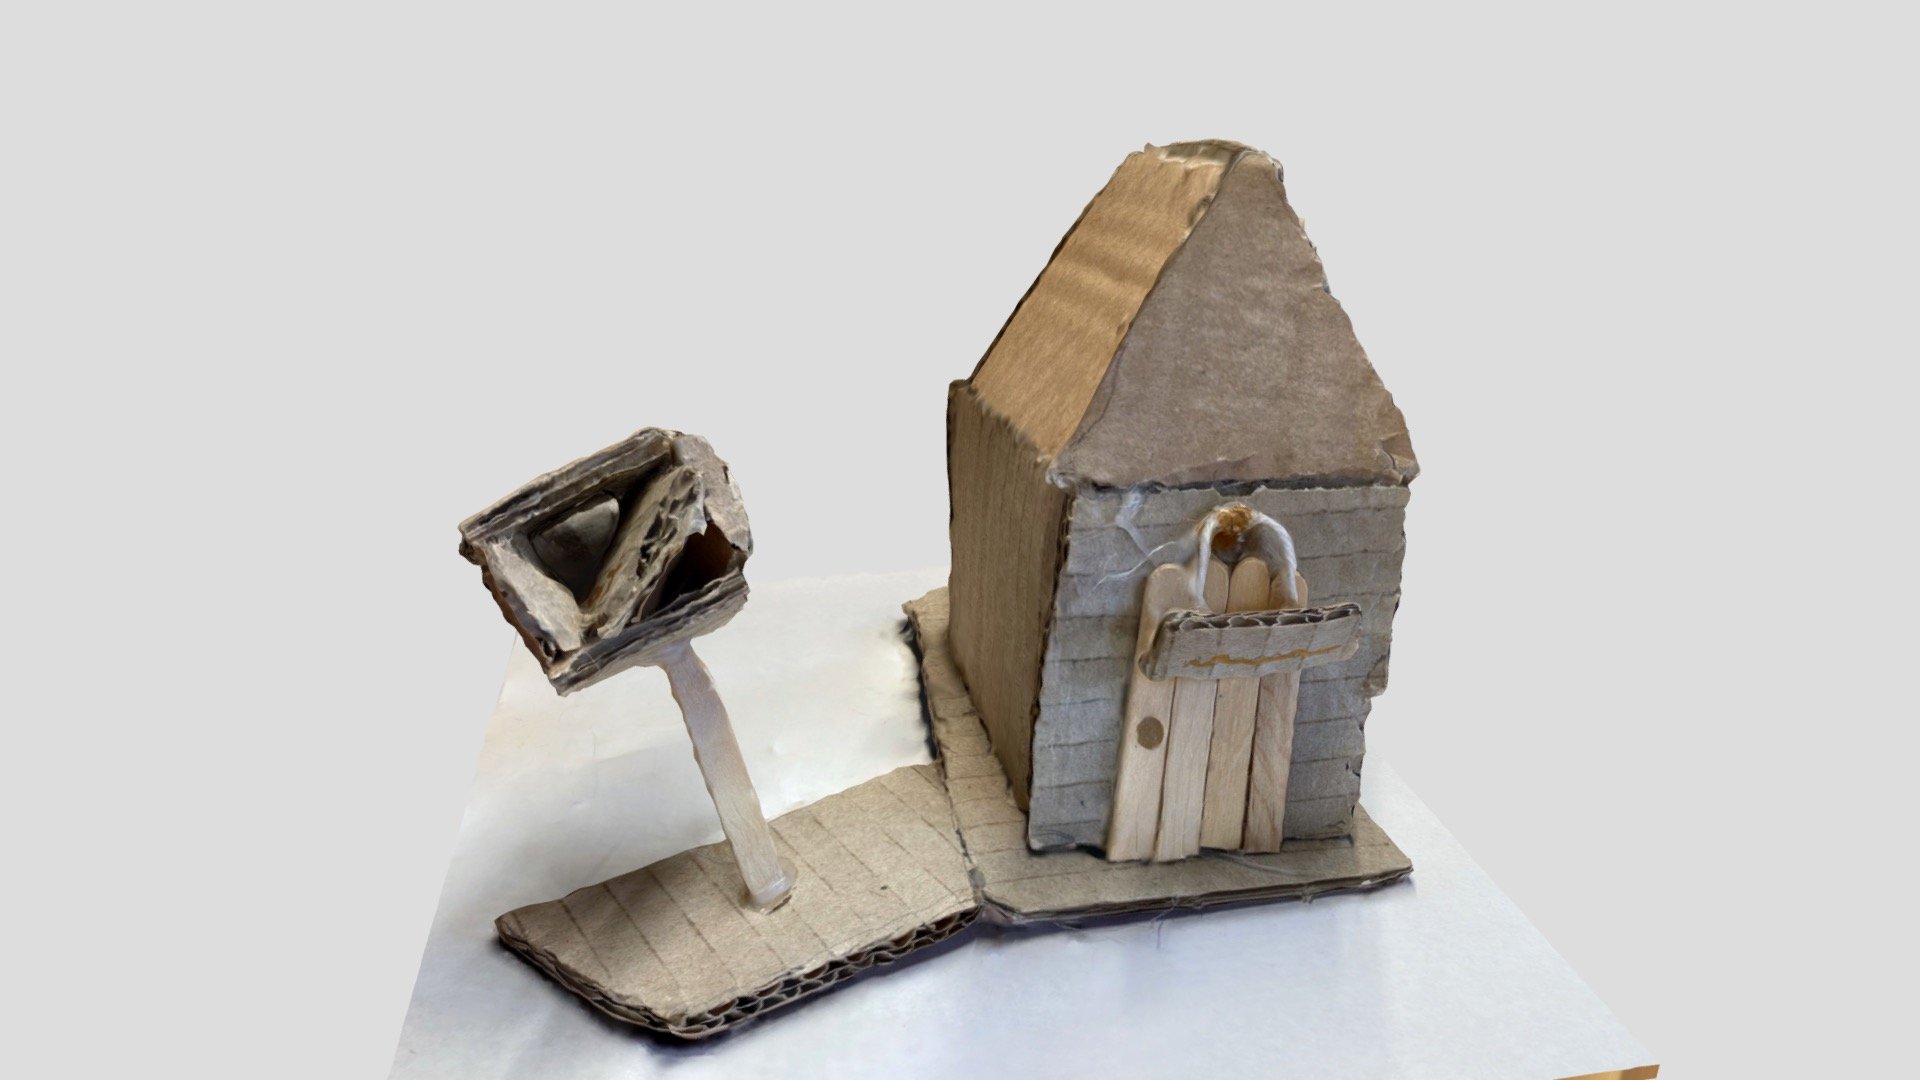 Small cardboard house with mailbox, built by a friend as a present for my daughters birthday. Had to scan it because it is so iconic 3d model